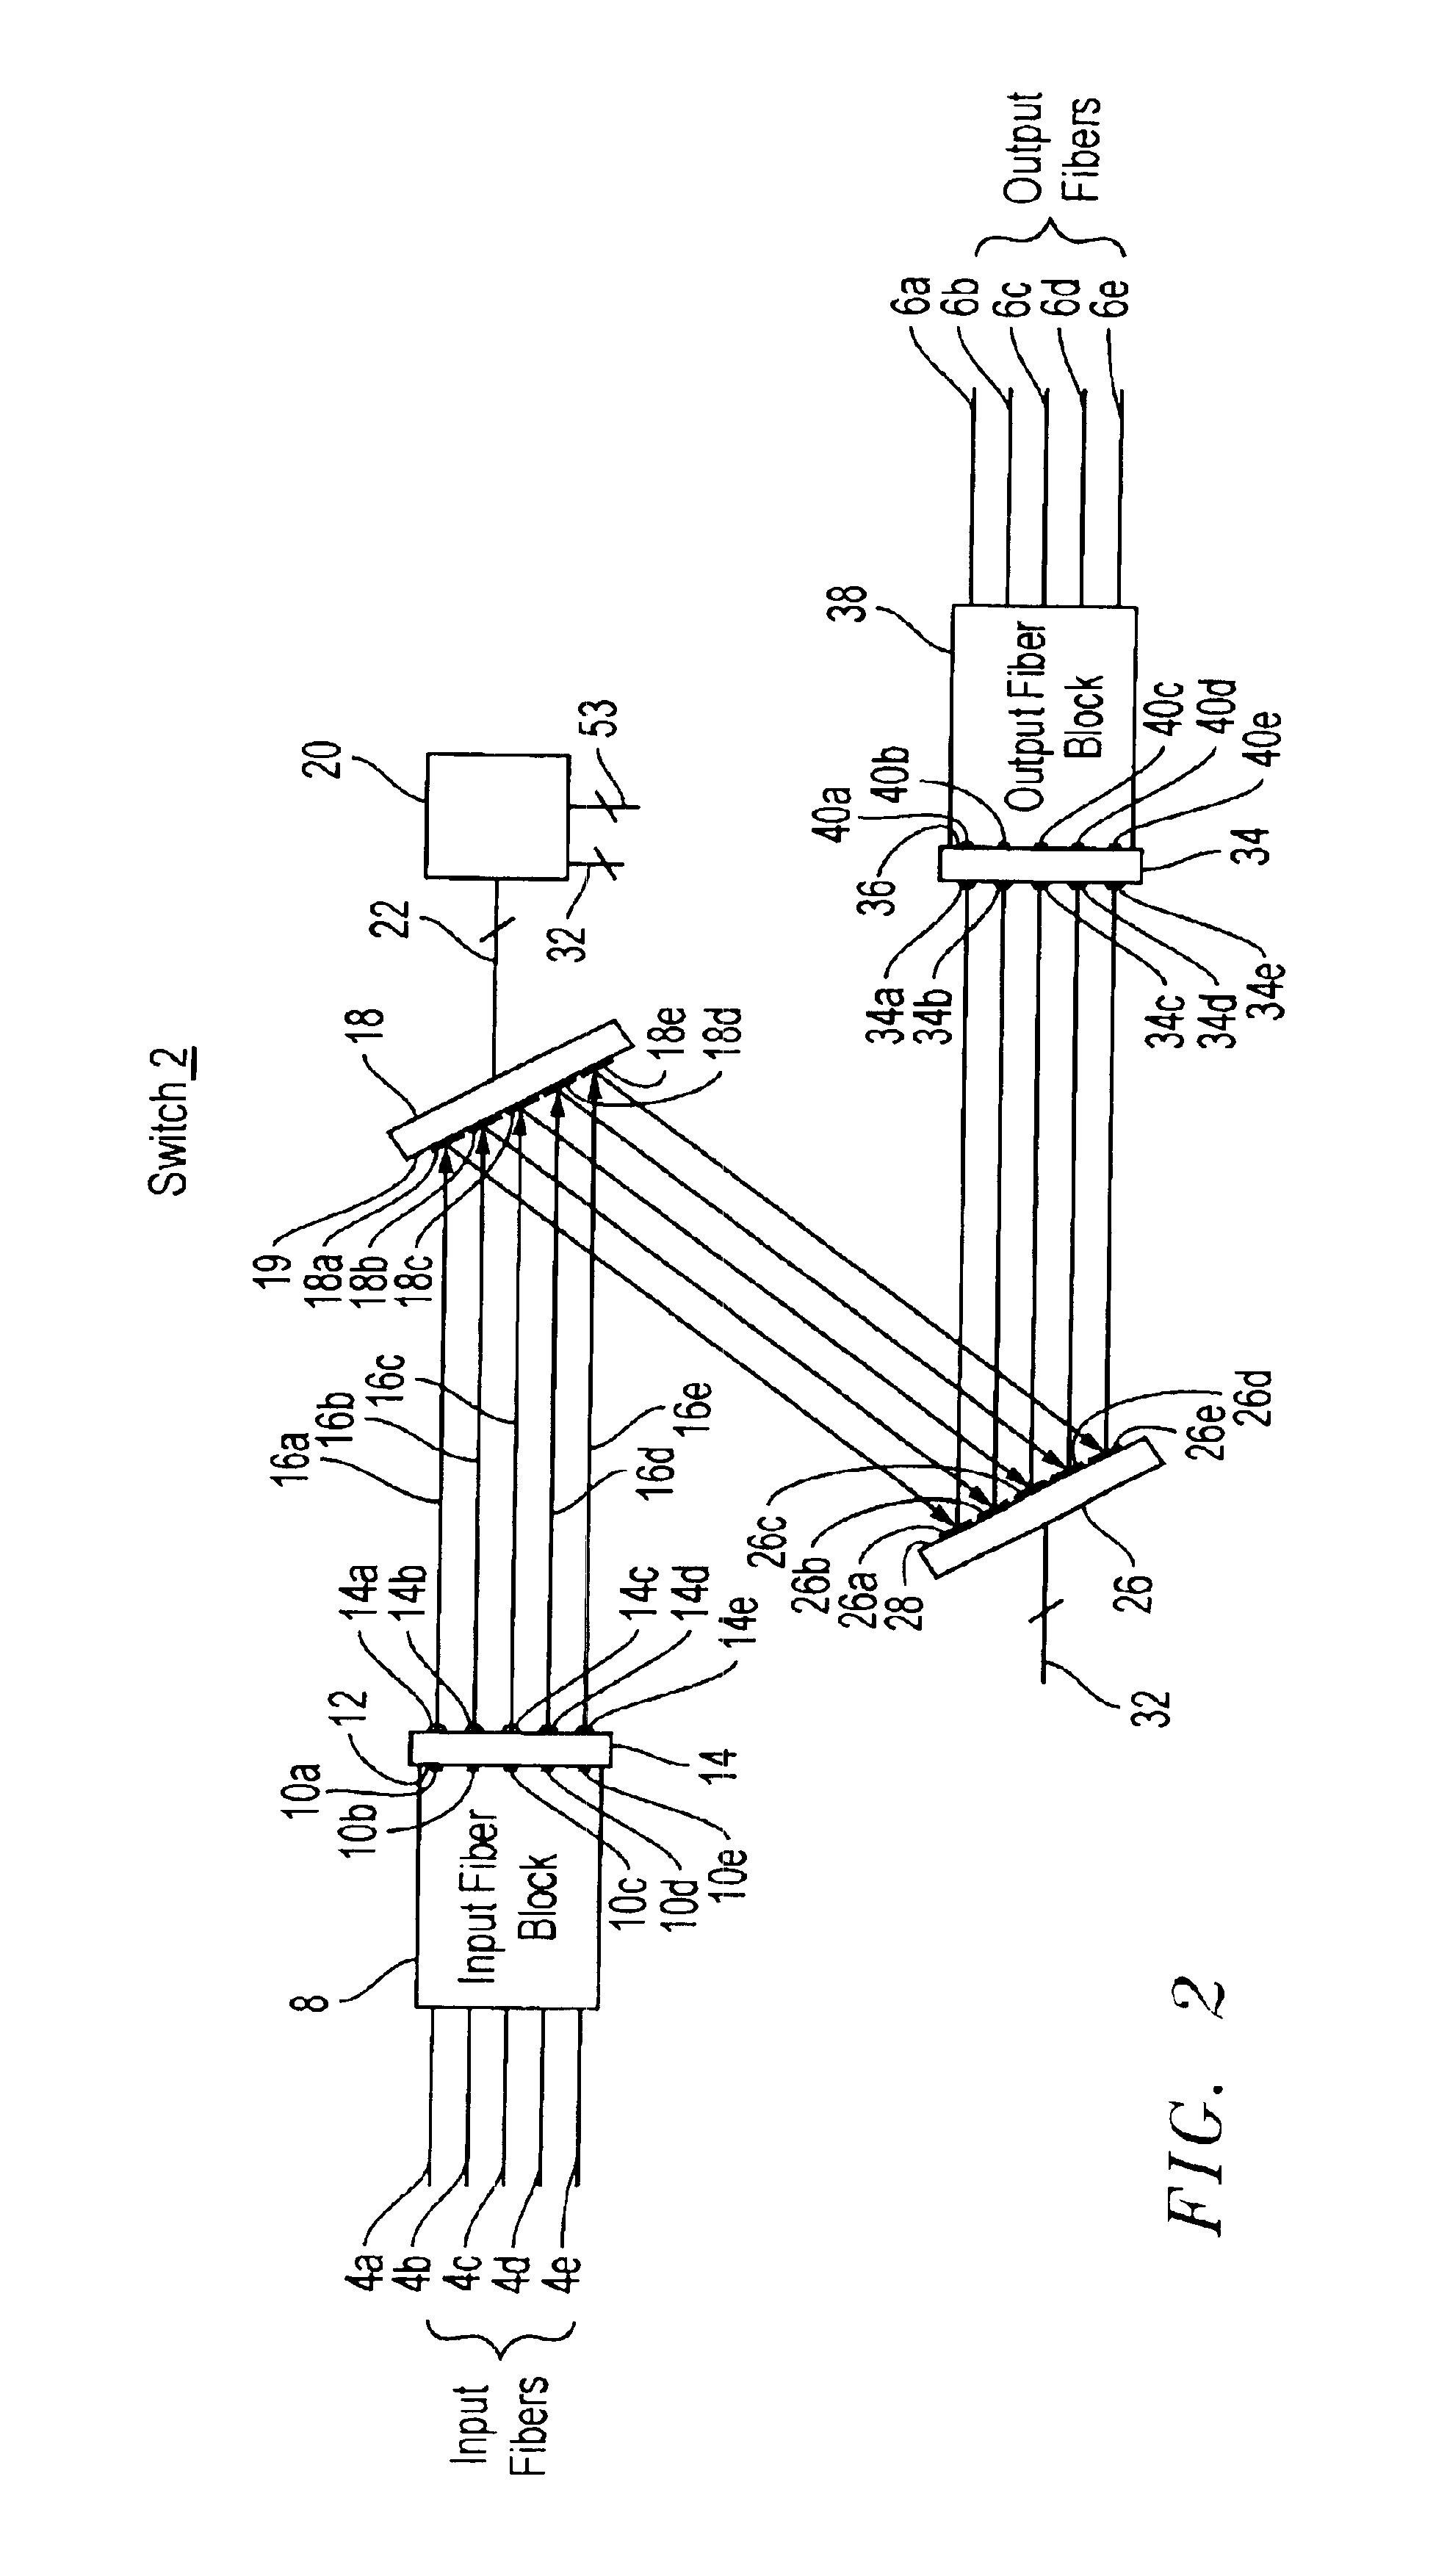 Optical system for calibration and control of an optical fiber switch